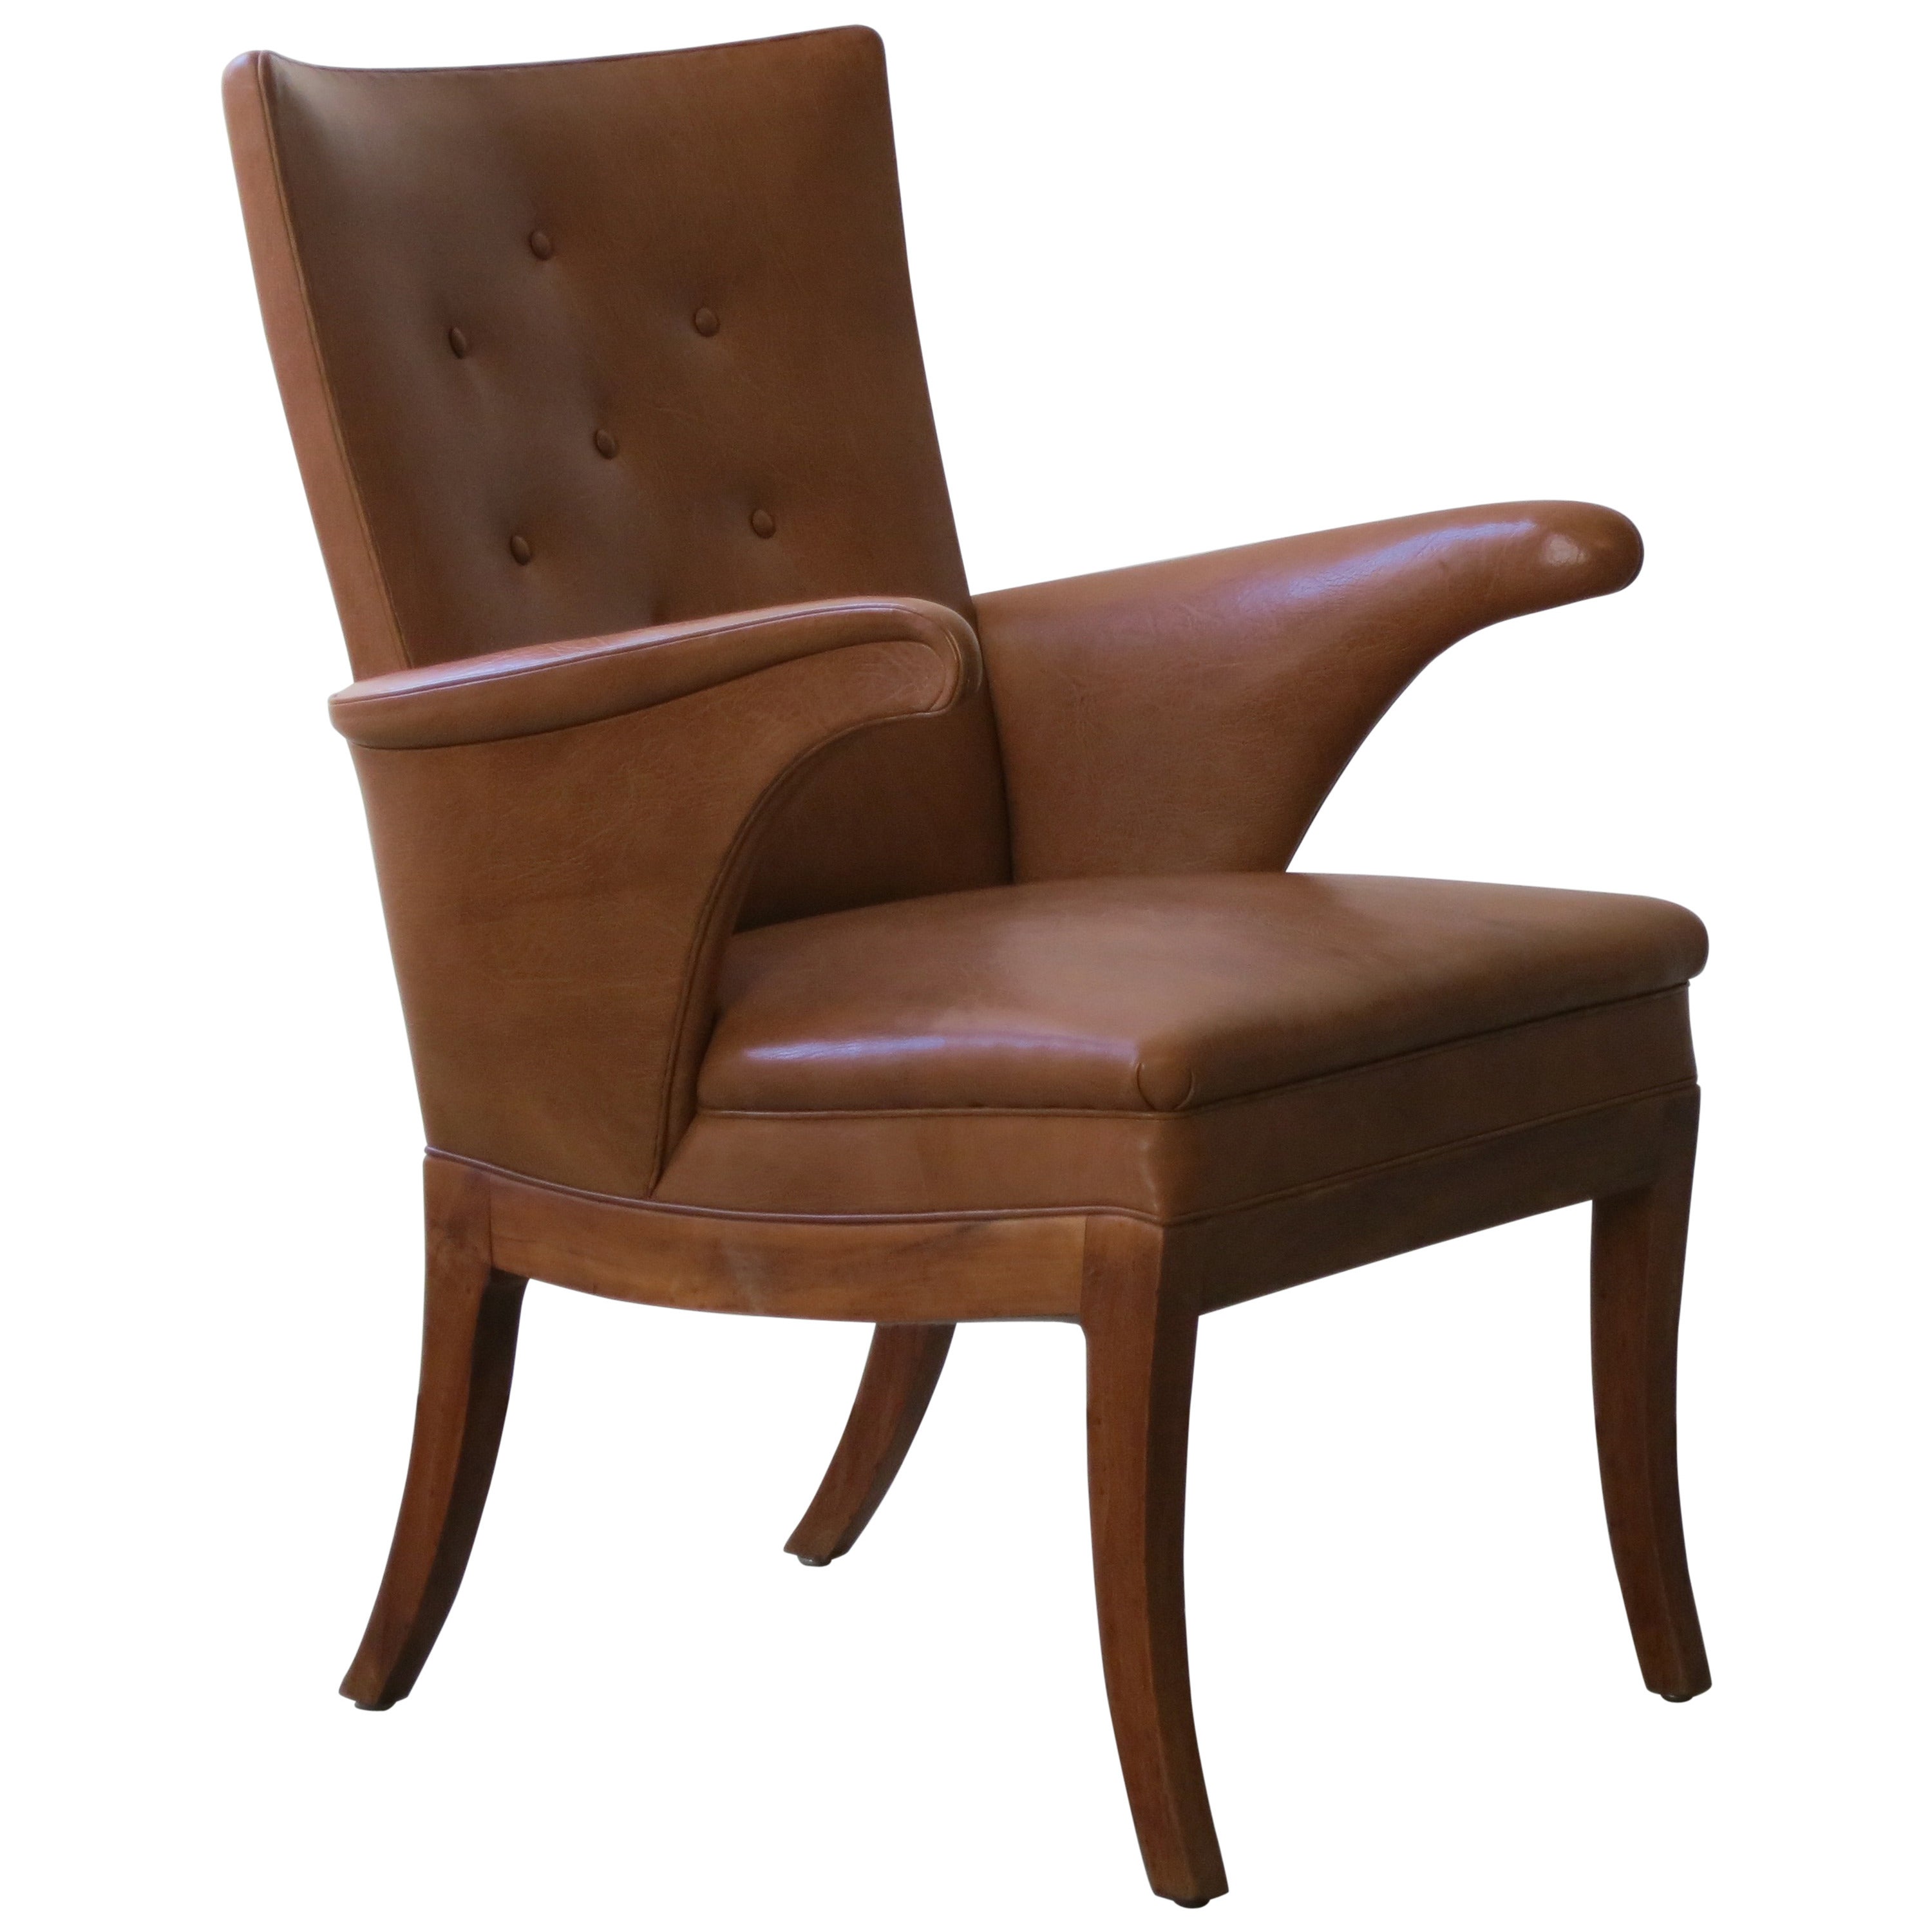 Armchair in Nigerian Goatskin by Frits Henningsen, 1930s For Sale